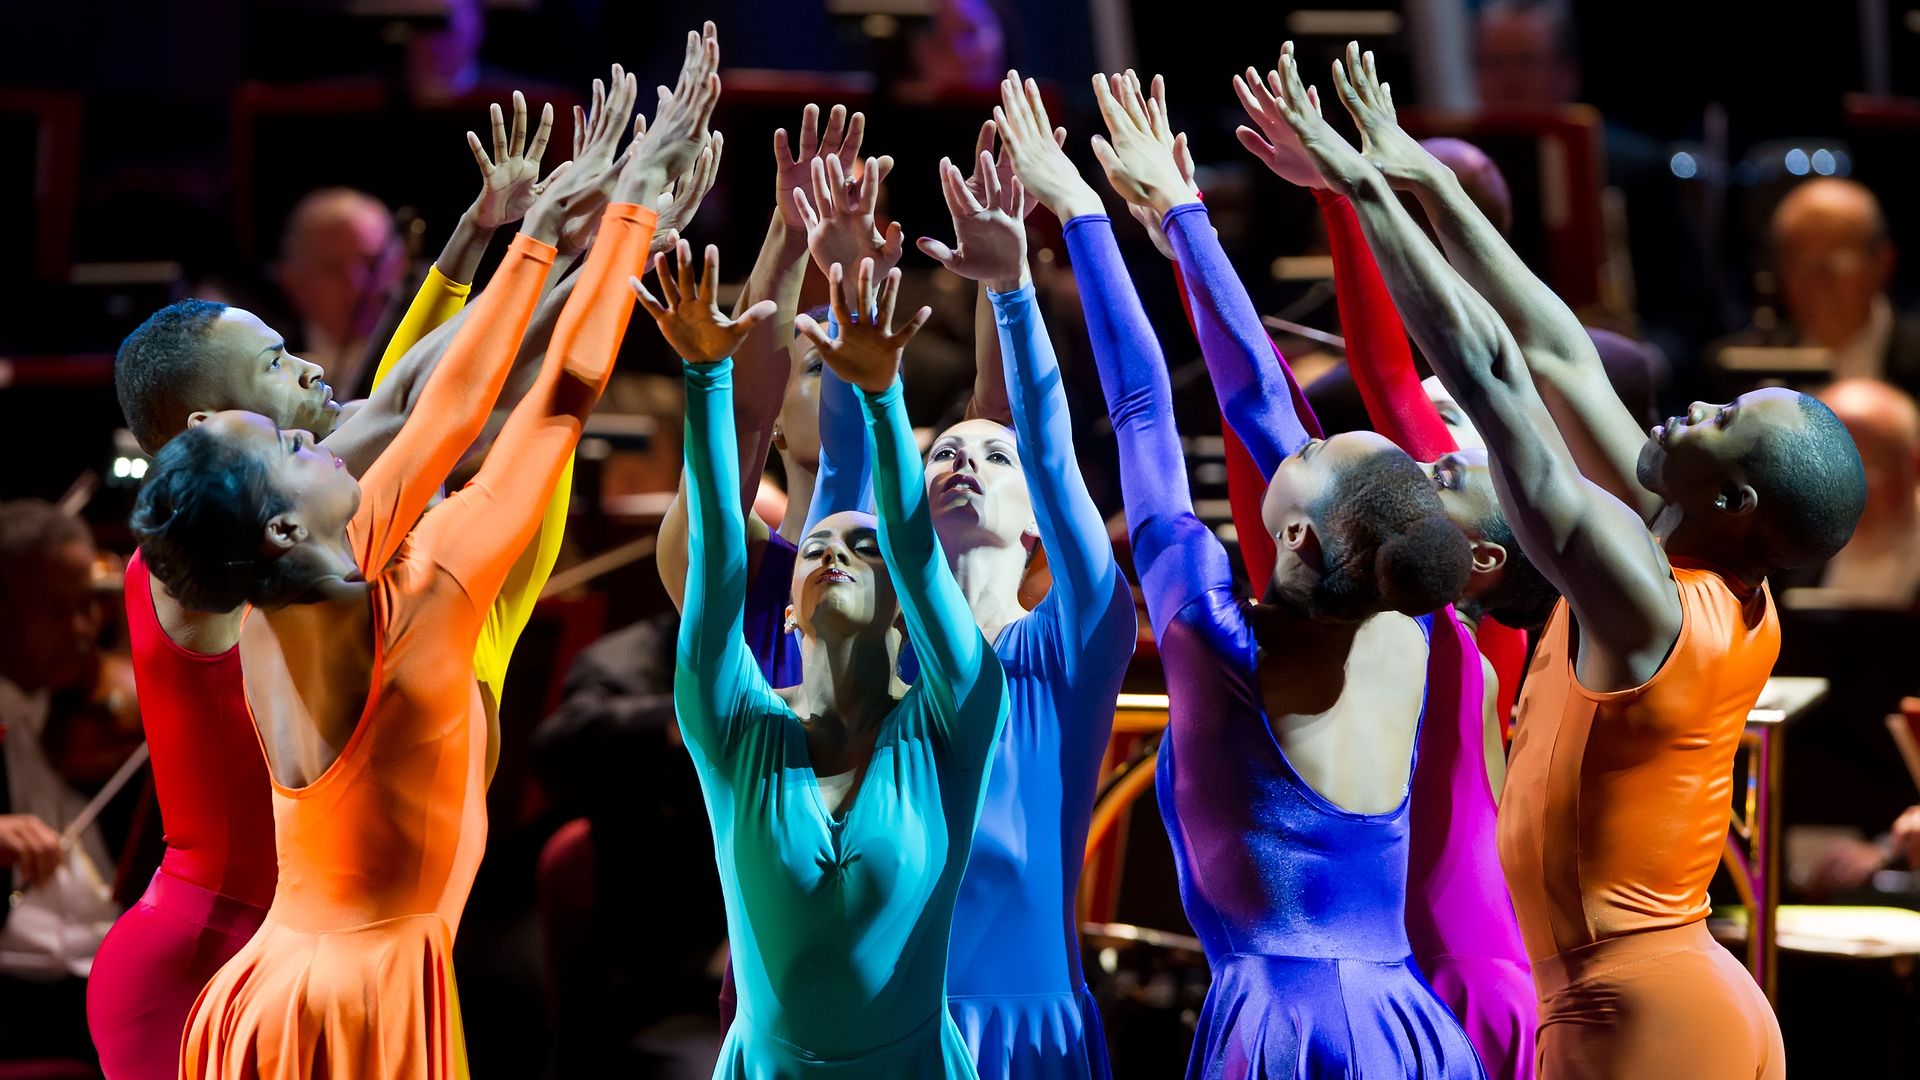 Dancers in brightly-colored costumes stand in a circle with their arms raised.